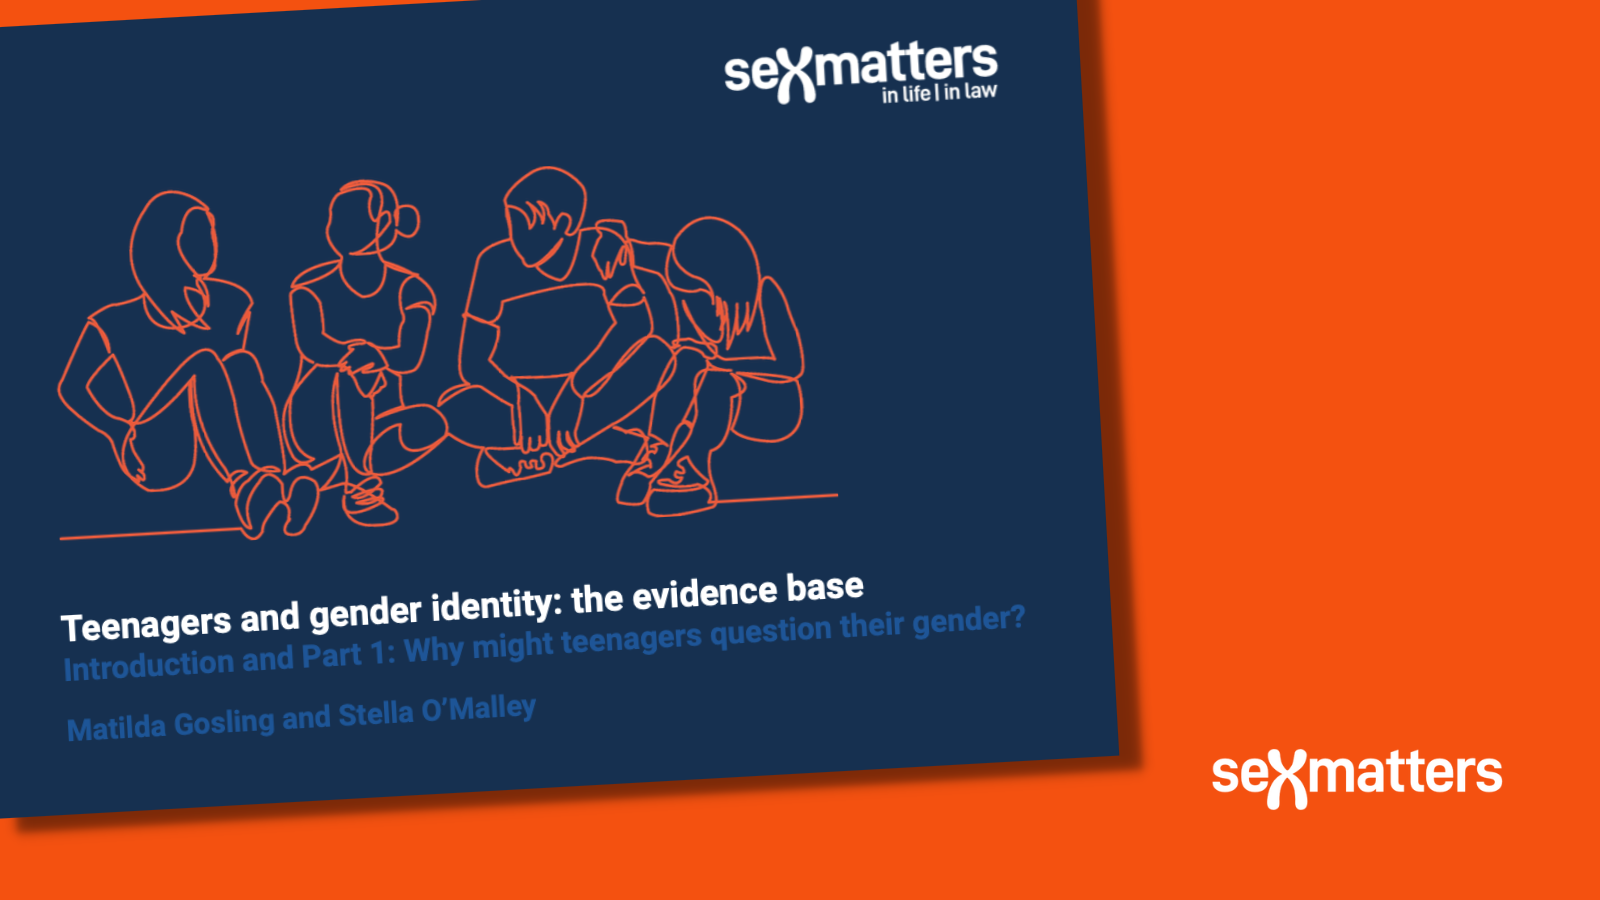 Teenagers and gender identity: the evidence base